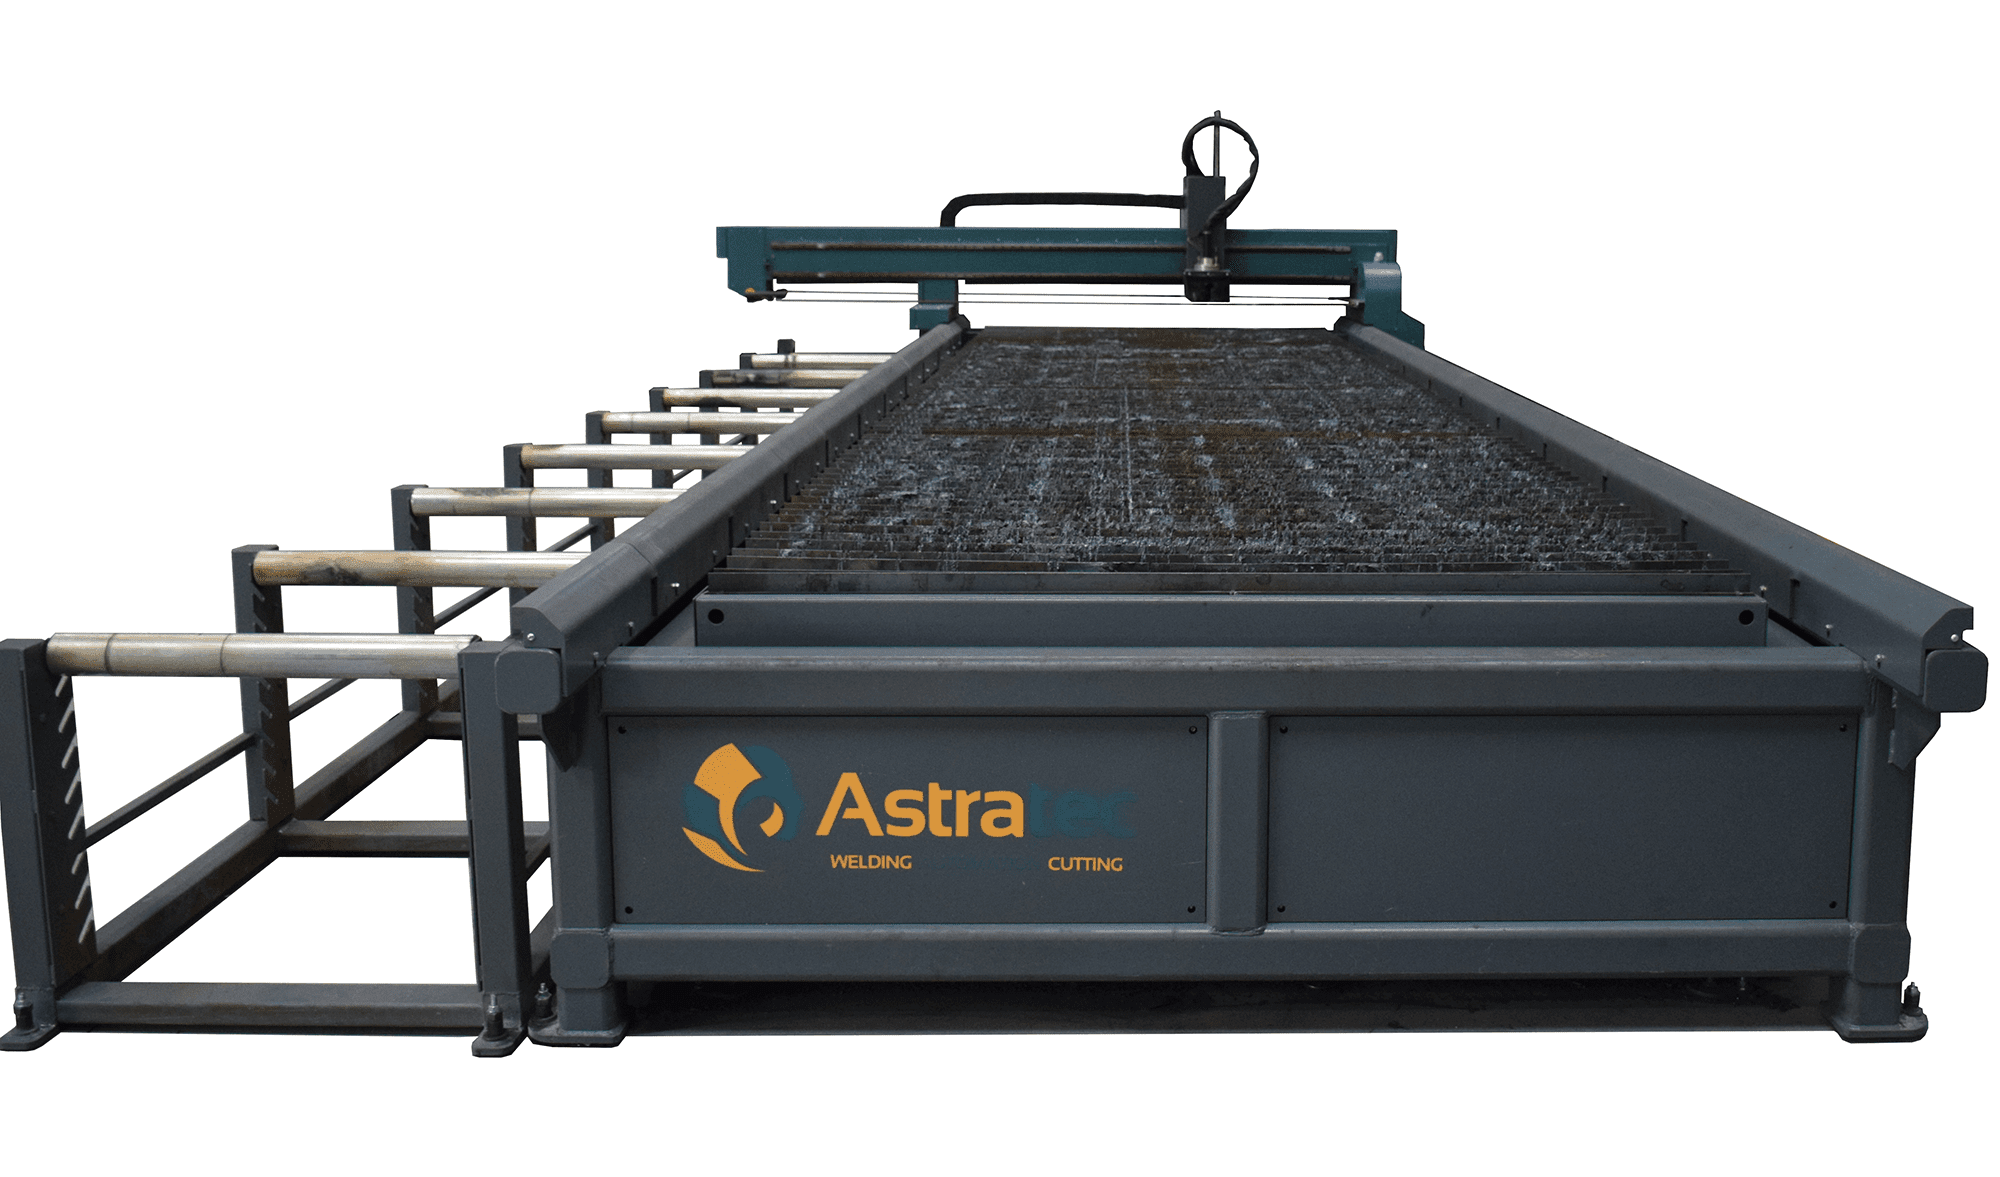 M series Astratec - Plasma cutting machines and Welding automation